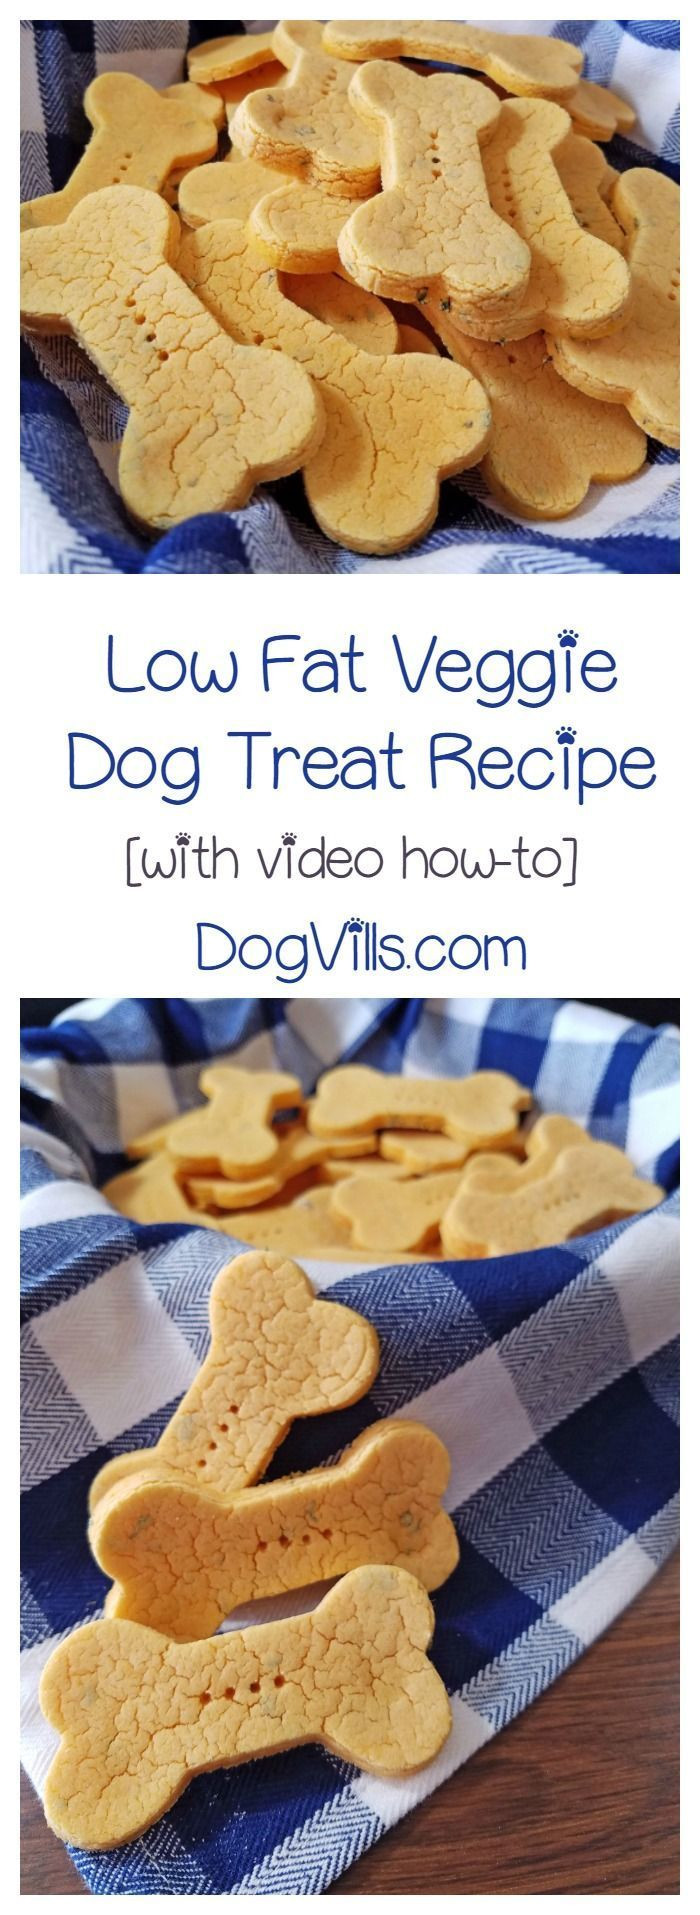 Low Fat Dog Food Recipes
 Dogs [with video tutorial] Recipe